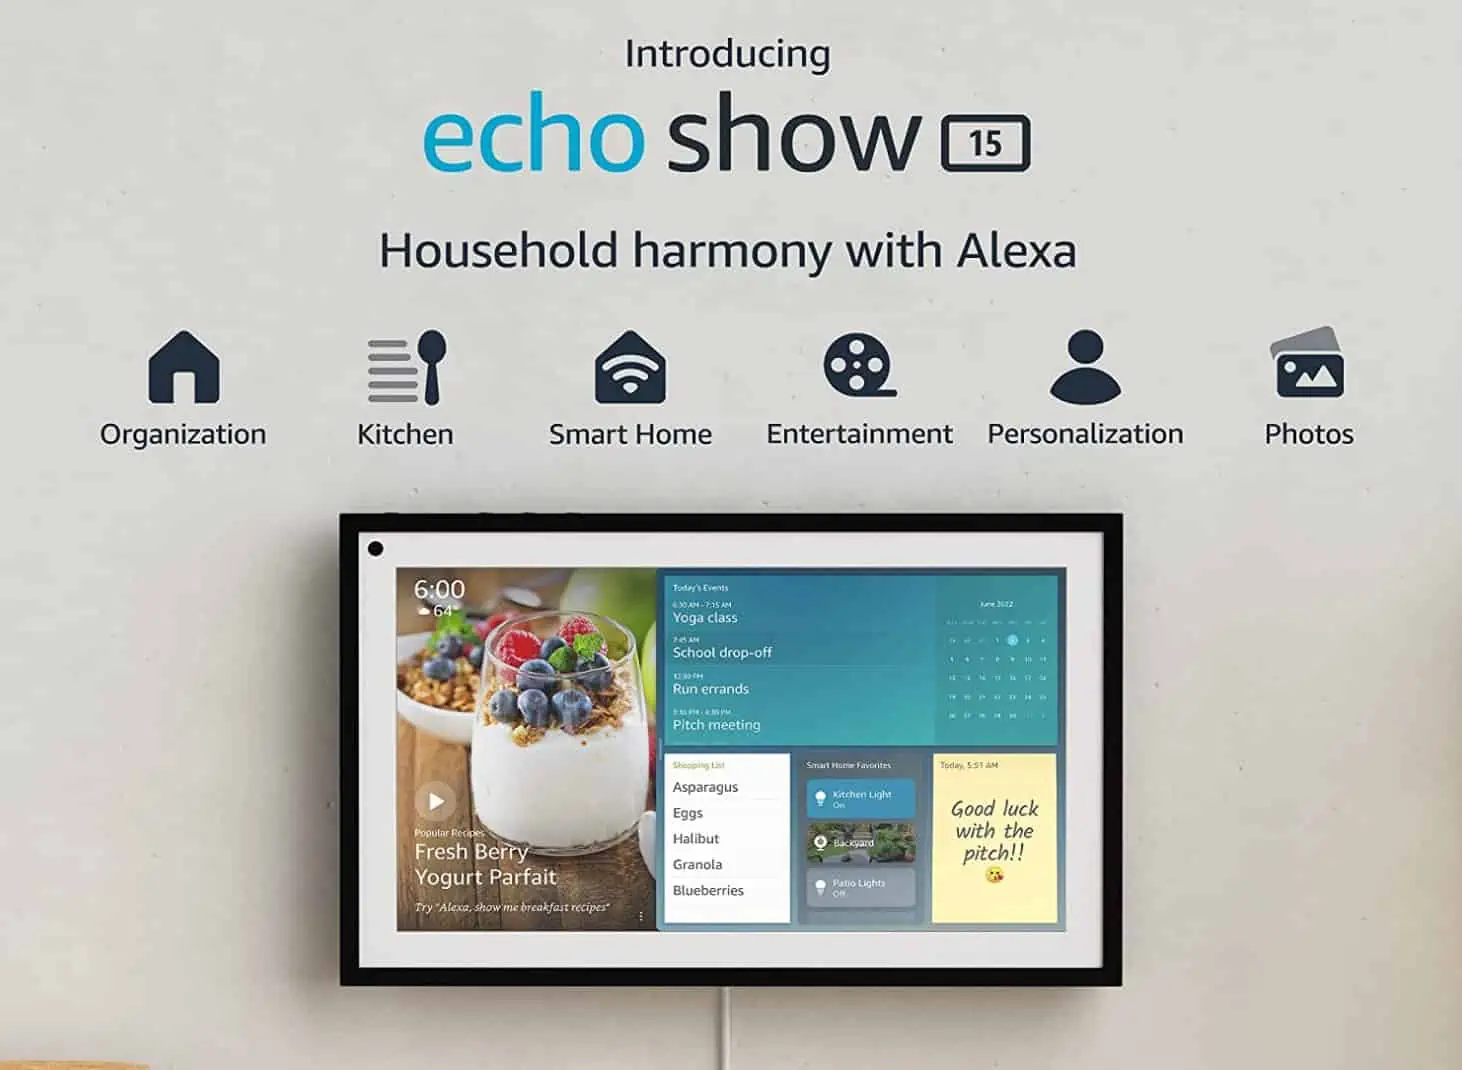 Amazon announces Echo Show 15, a 15-inch smart display powered by Alexa